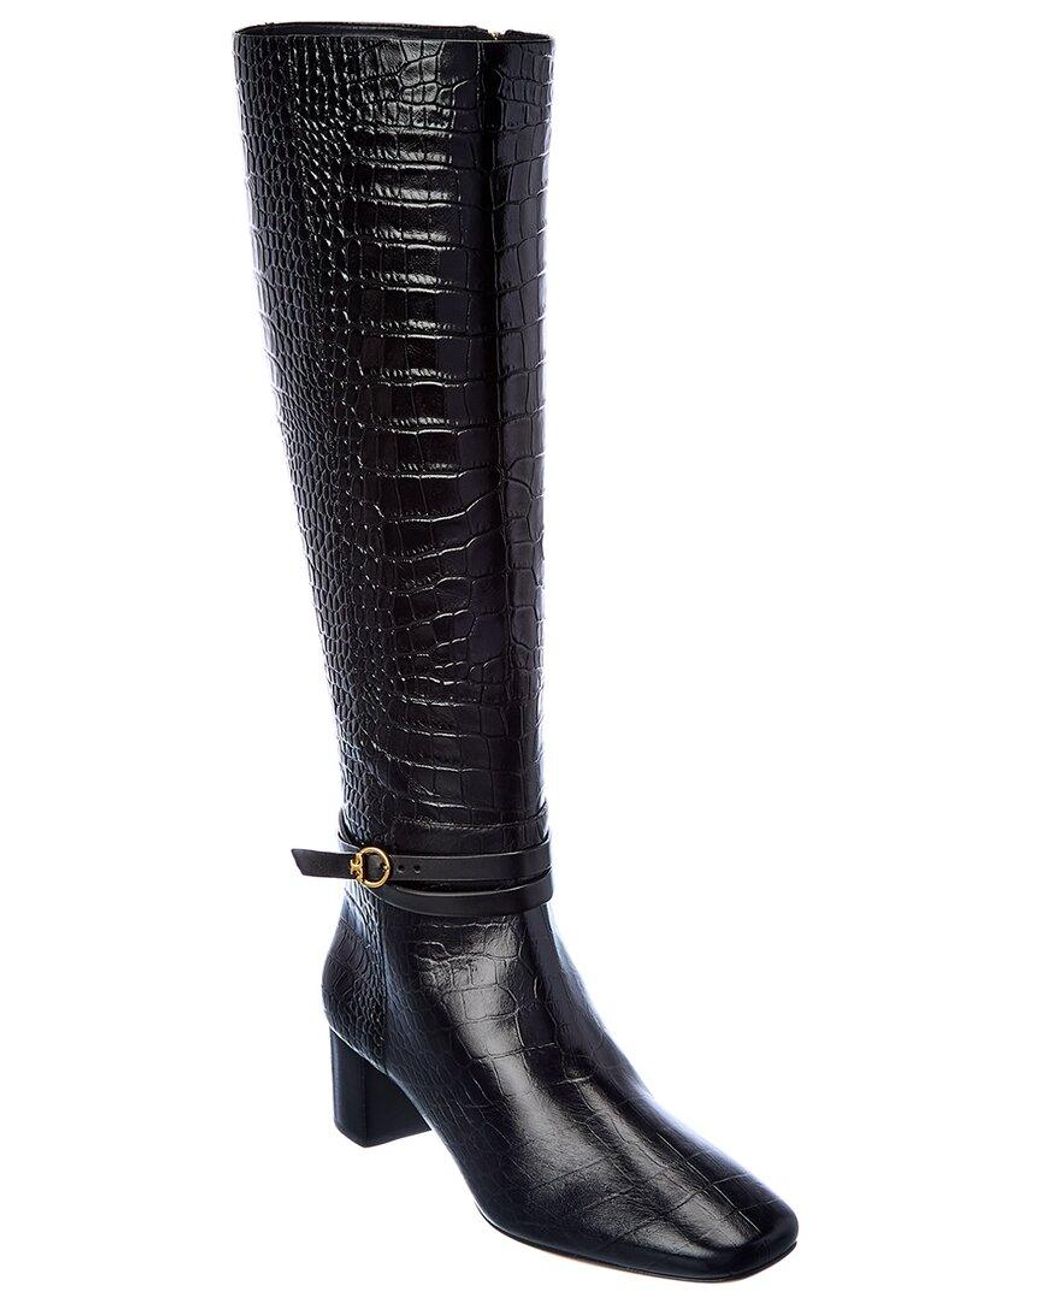 Tory Burch Squared Toe Croc-embossed Leather Knee-high Boot in Black | Lyst